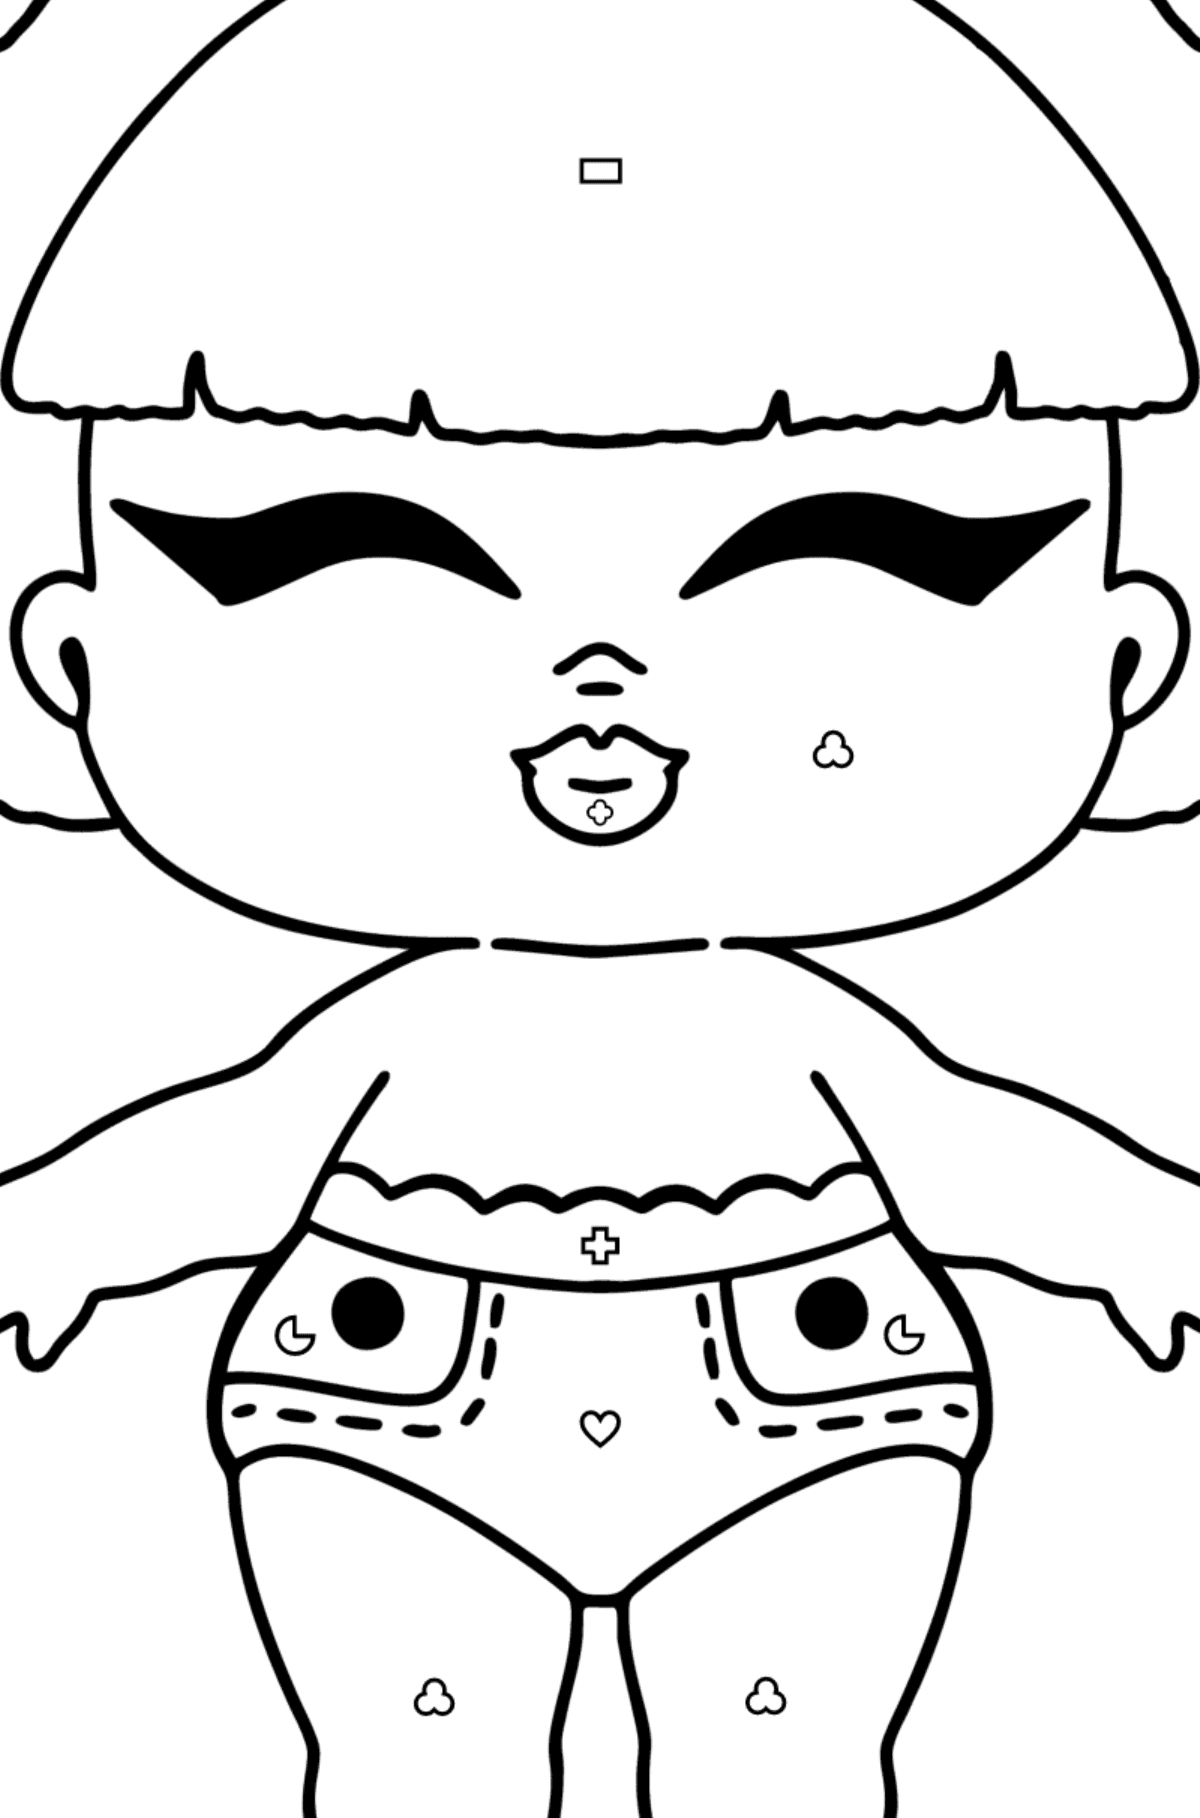 LOL Surprise Lil Pranksta coloring page - Coloring by Geometric Shapes for Kids